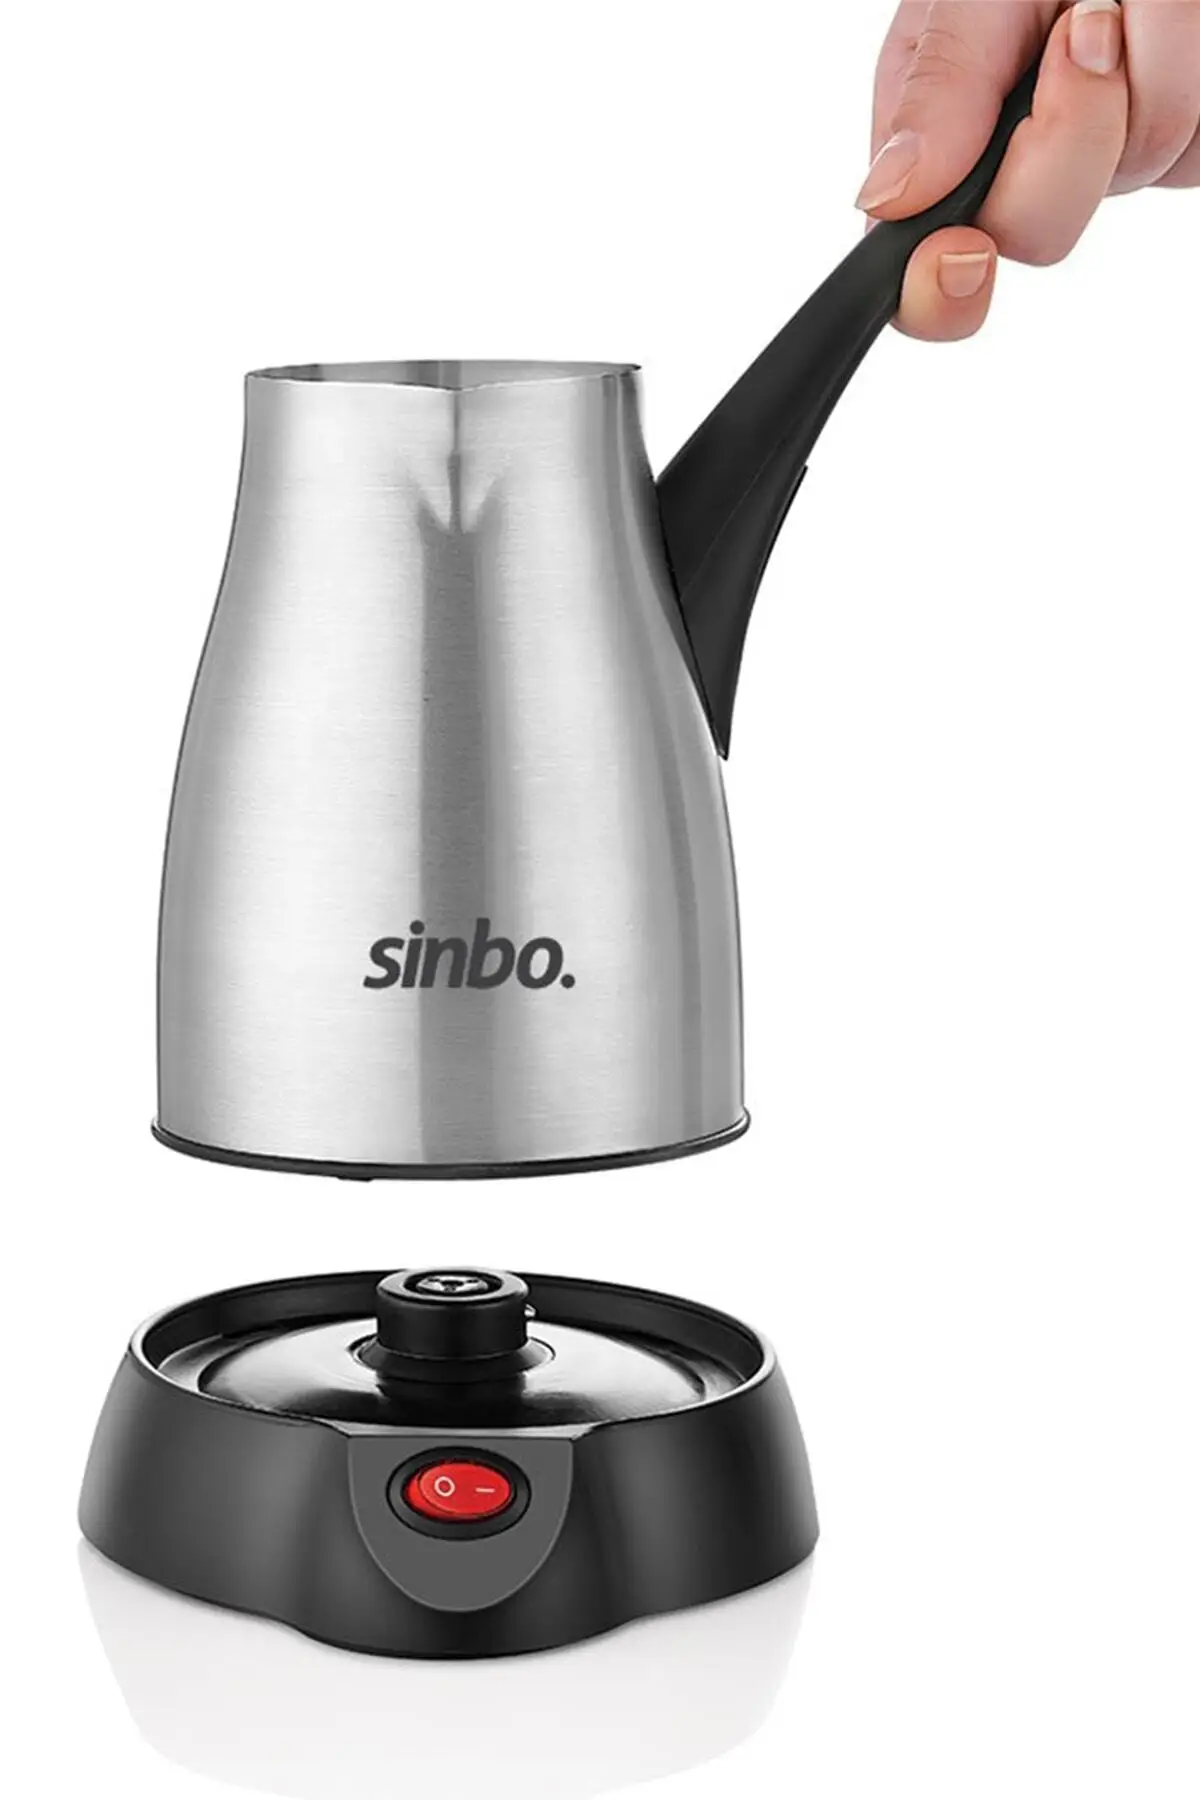 Sinbo Turkish Coffee Machine Electric Kettle Stainless Espresso Maker Portable Fast Wired 1000W 400ml 5 Cup чайник Кофемашина